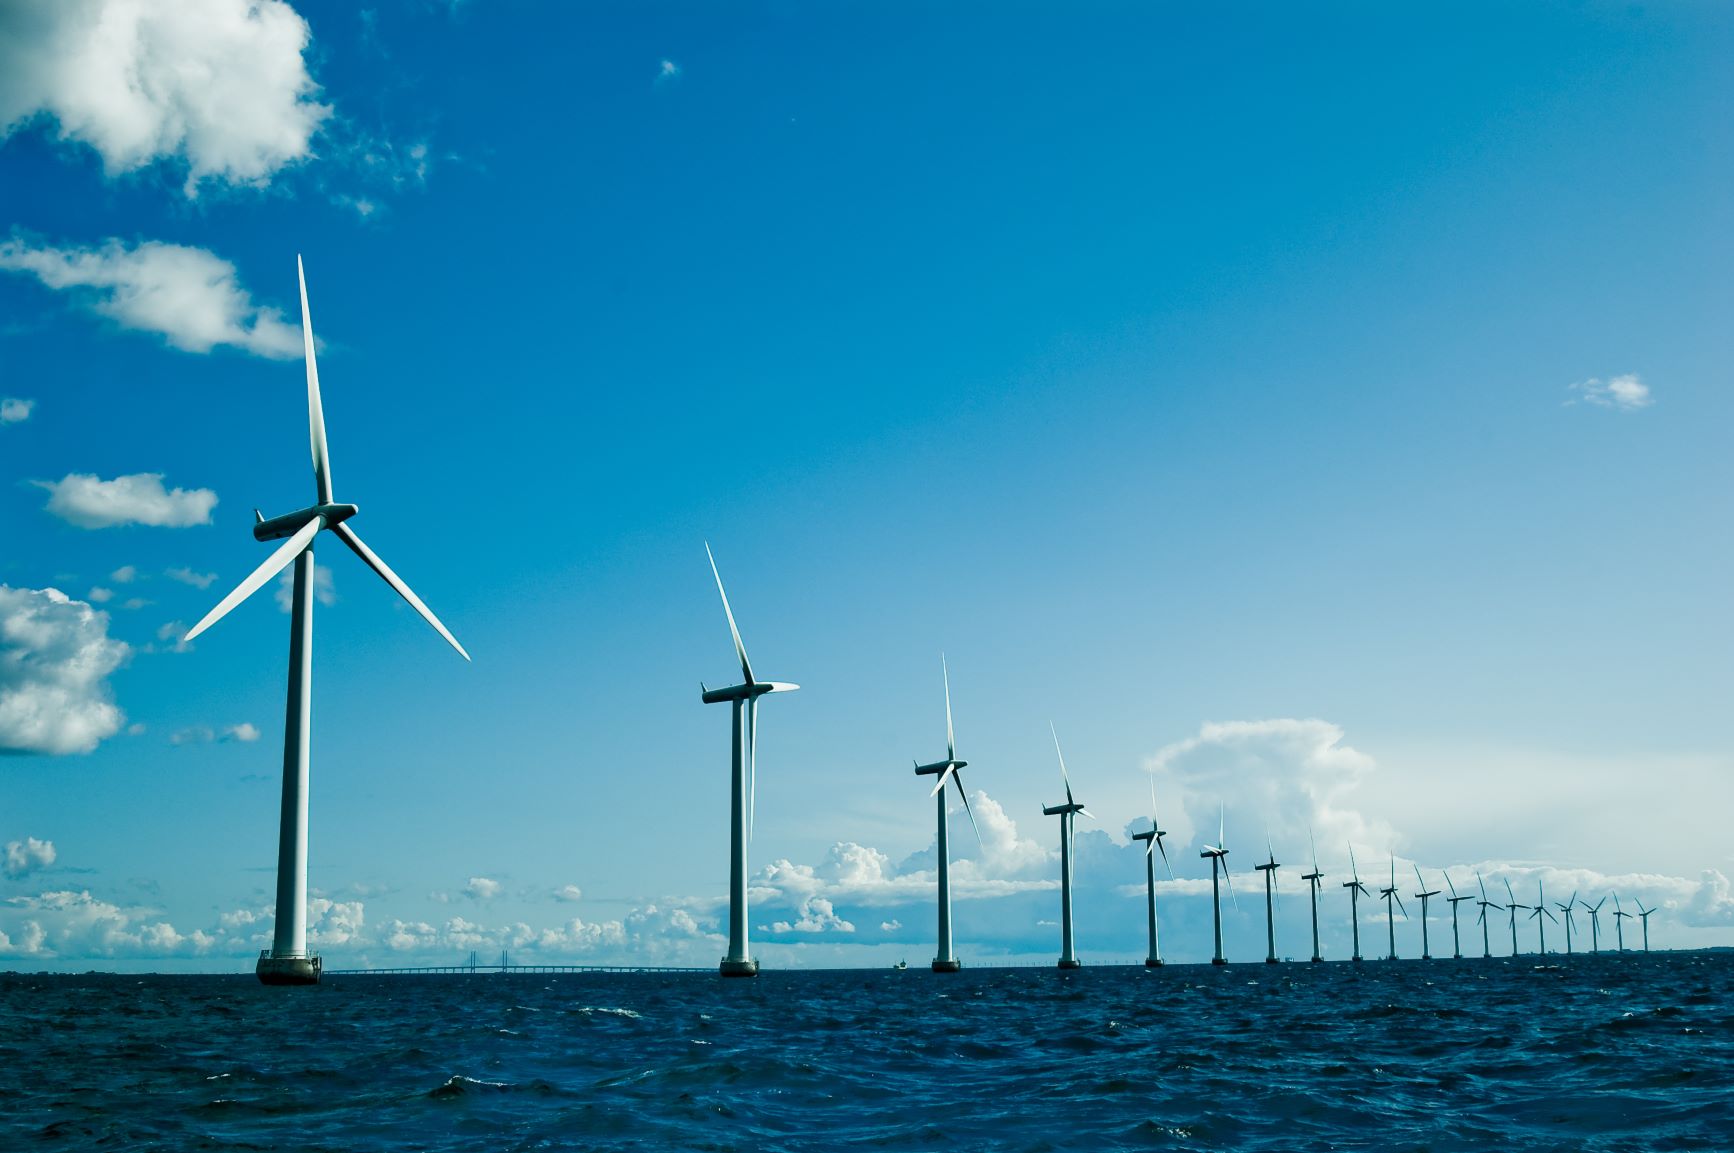 A photo for illustration purpose only, showing an offshore wind farm